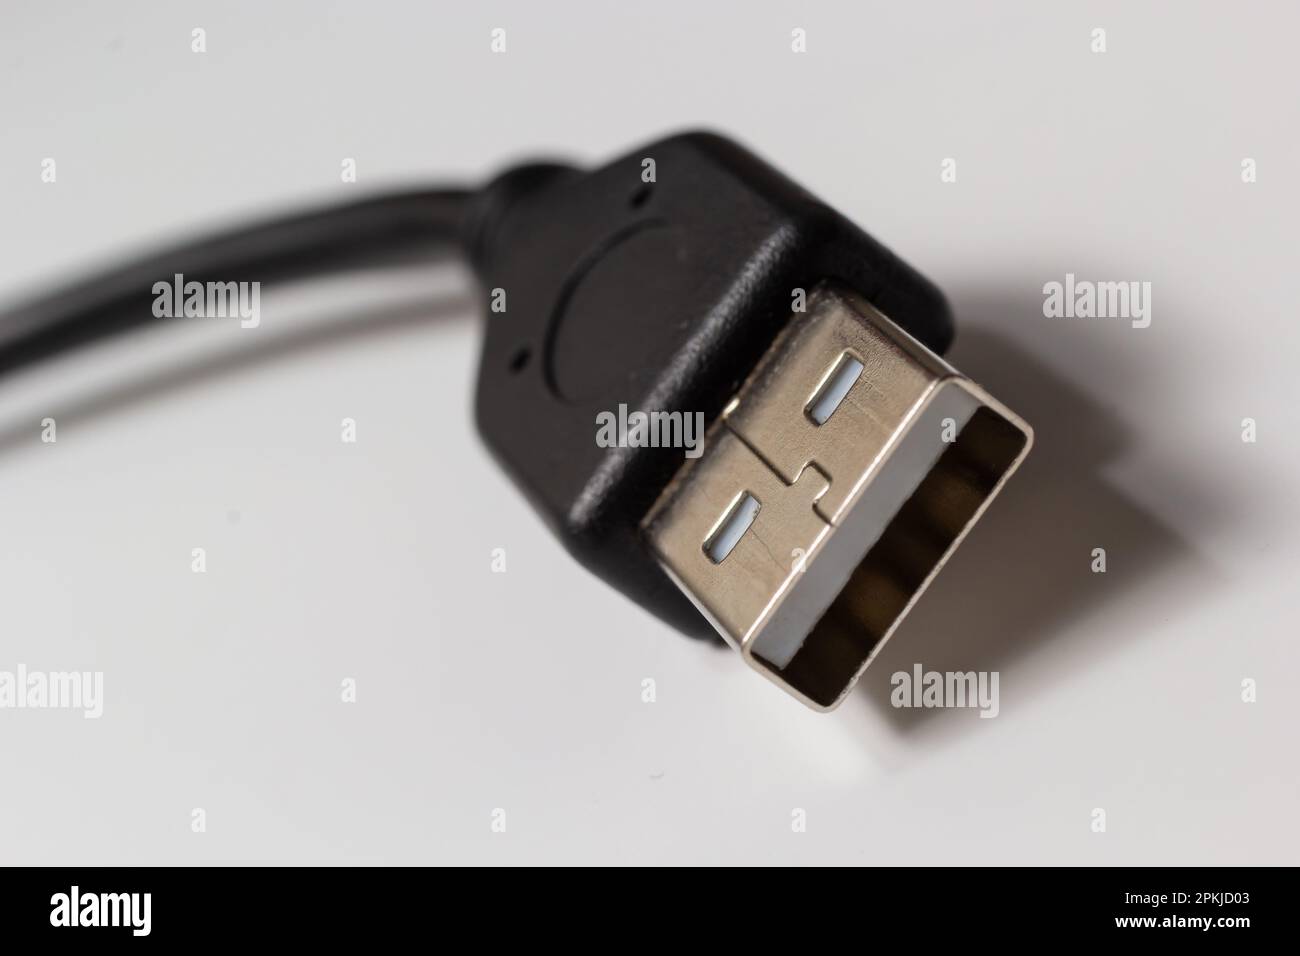 Close up of USB cable on white background. Data transfer technologies between devices via cable. Stock Photo